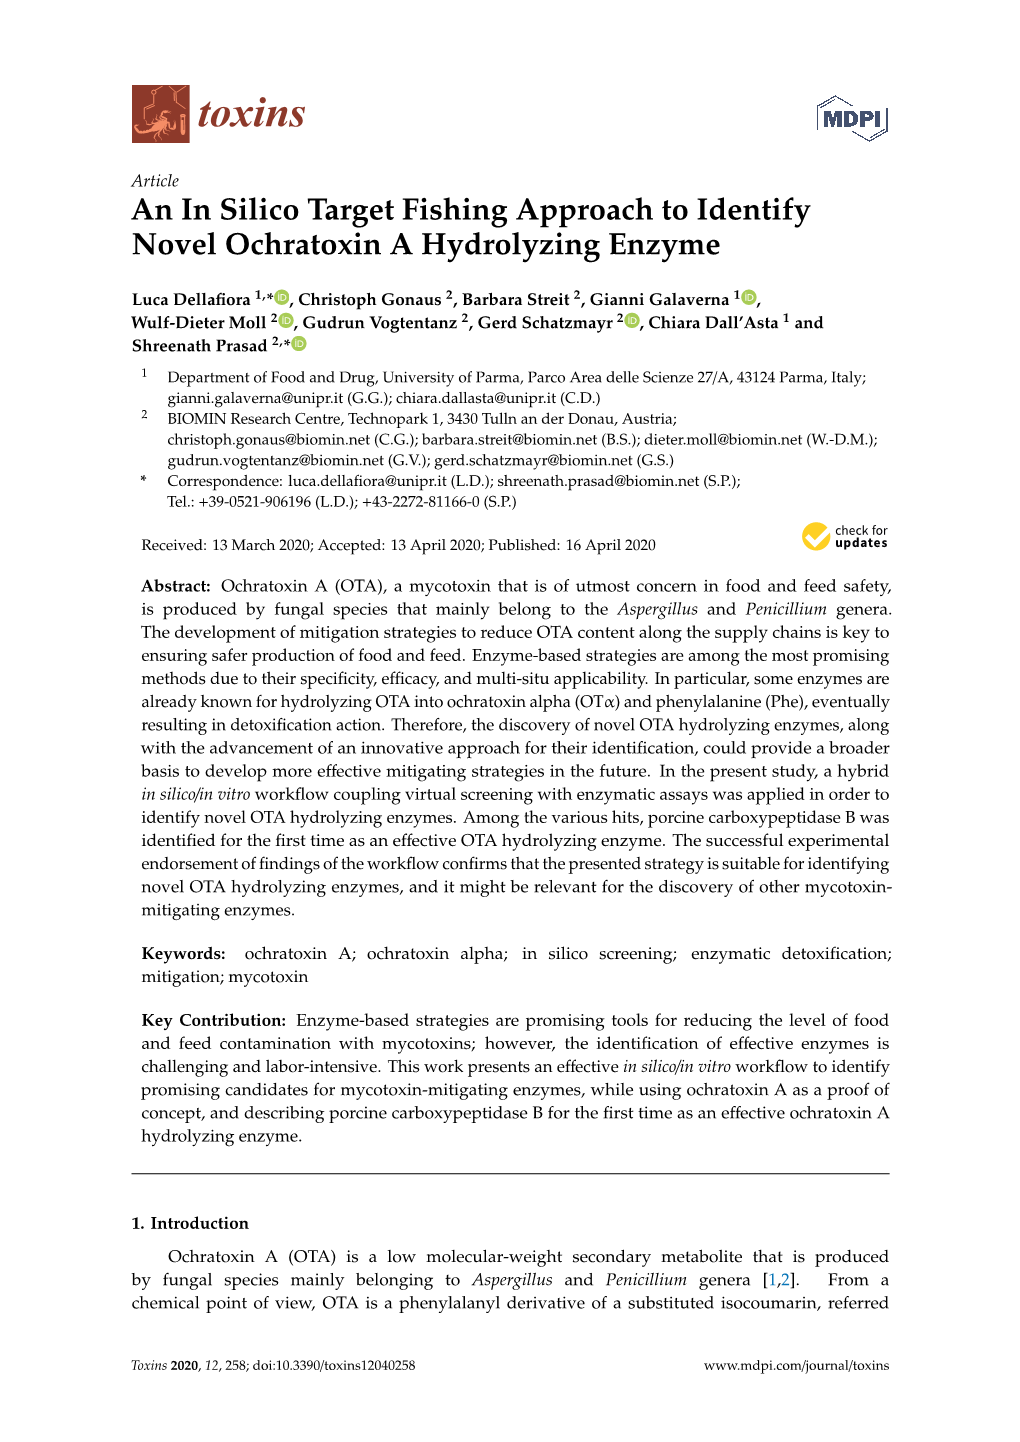 An in Silico Target Fishing Approach to Identify Novel Ochratoxin a Hydrolyzing Enzyme